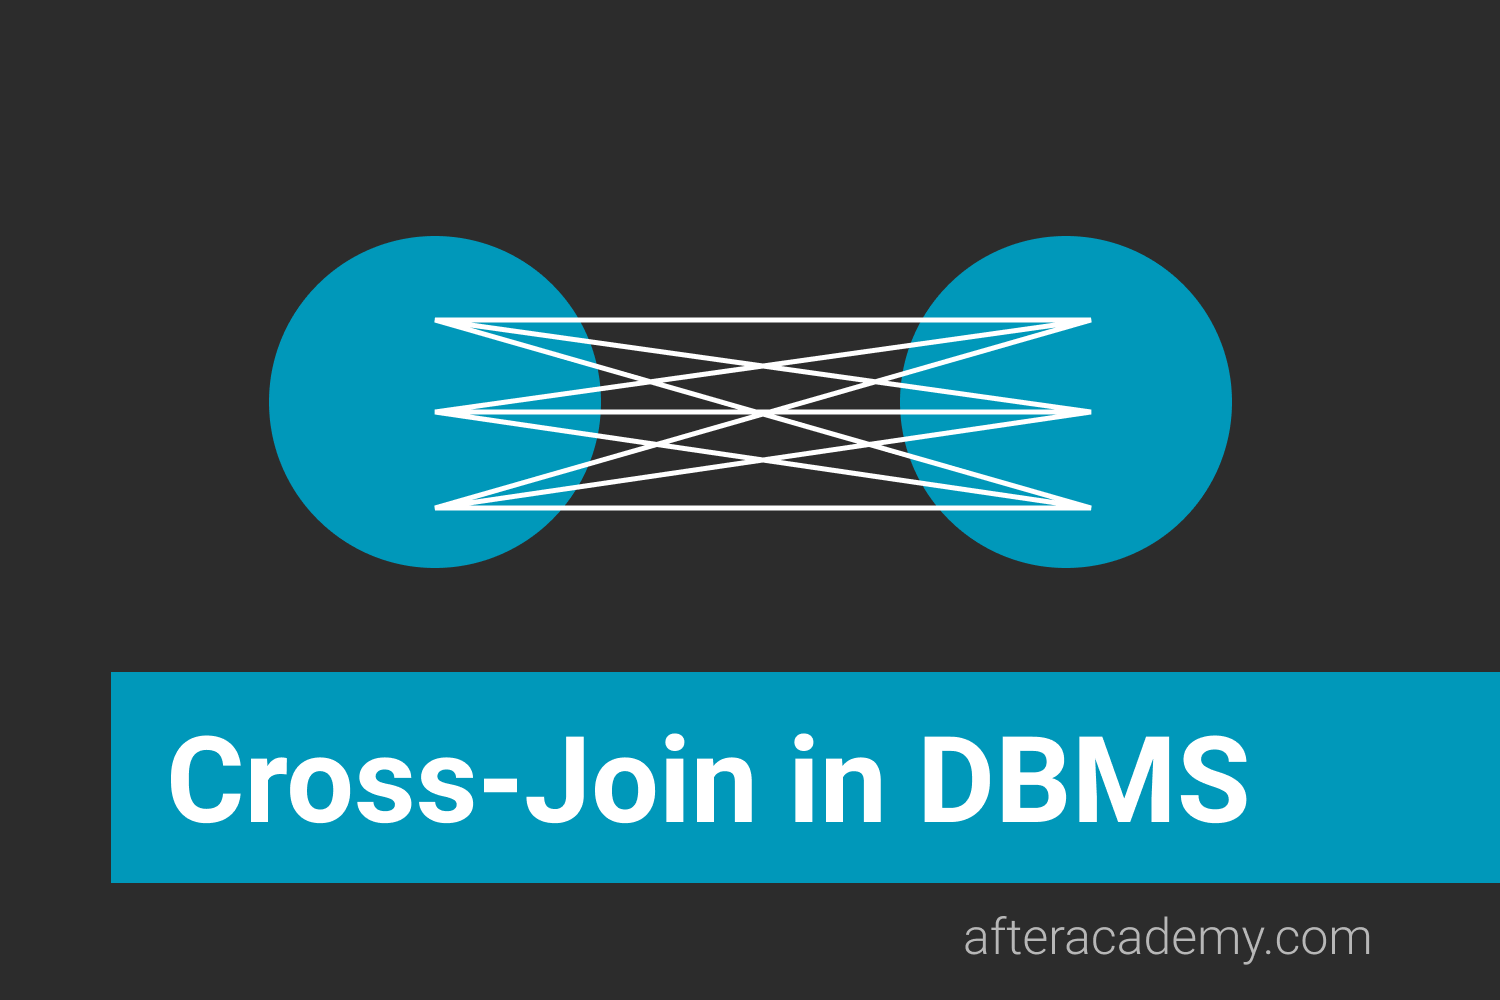 What is Cross-Join in DBMS?